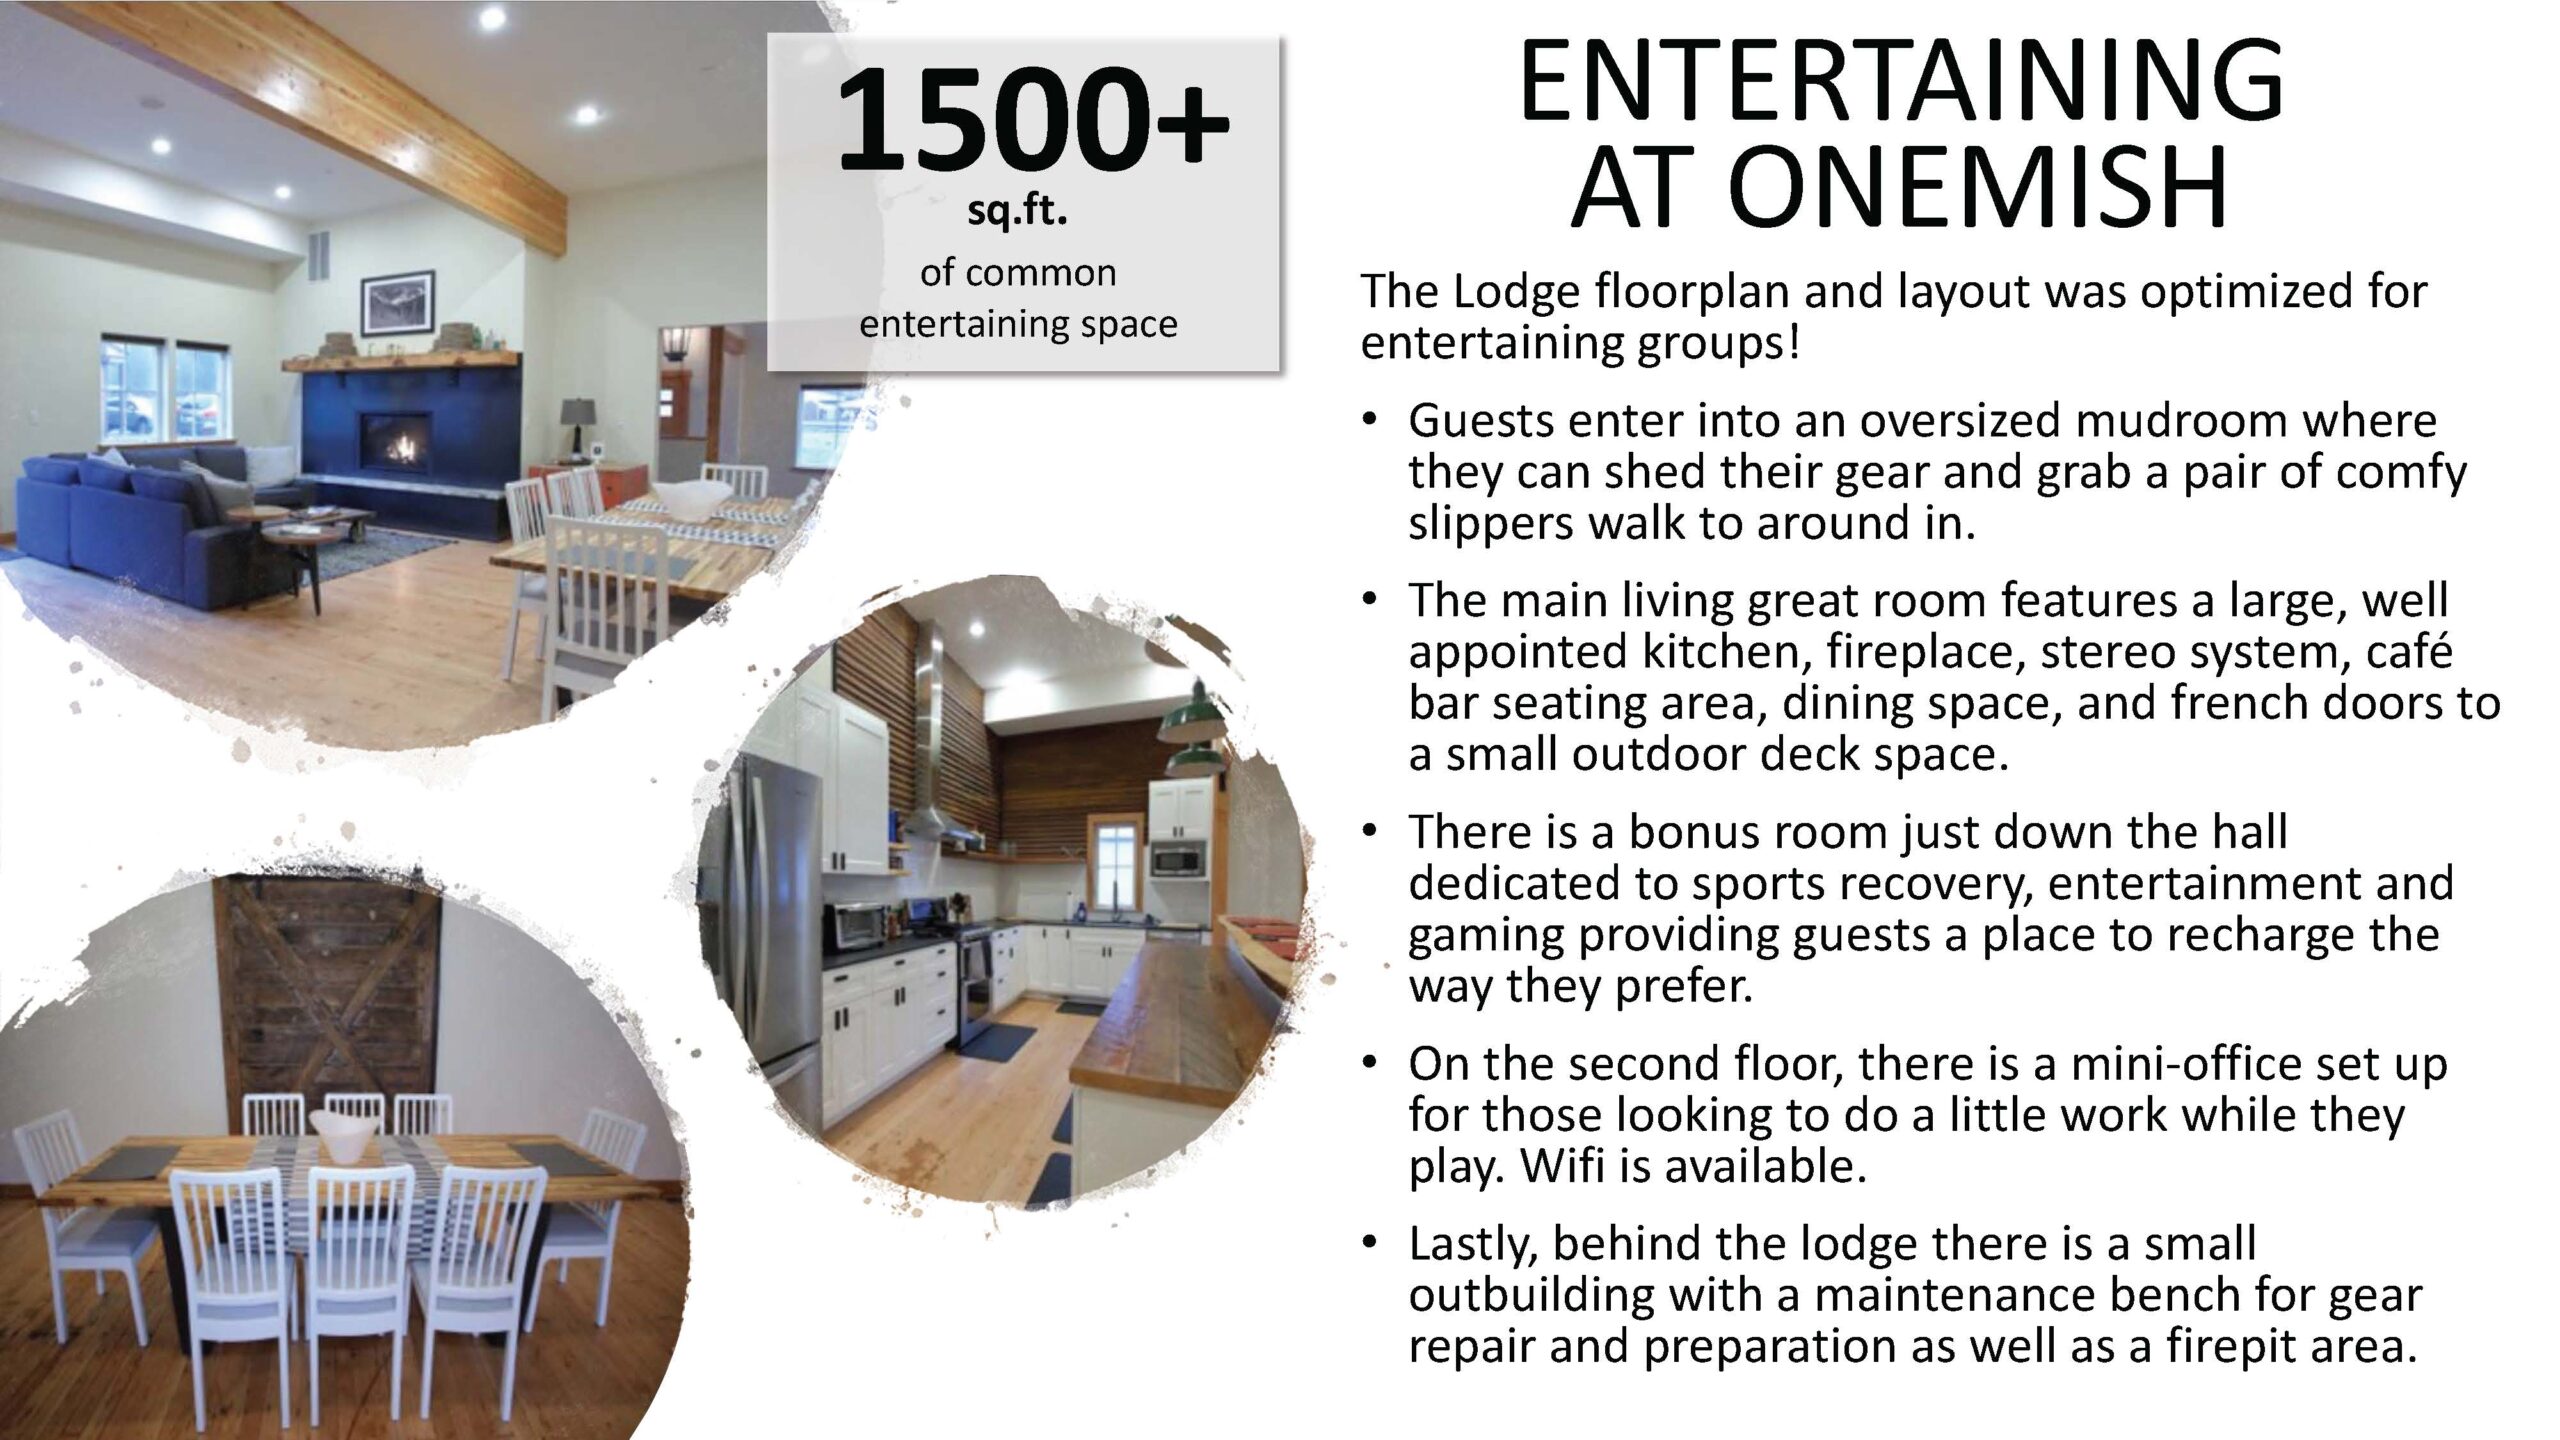 Onemish Lodge Overview 2018_Page_08